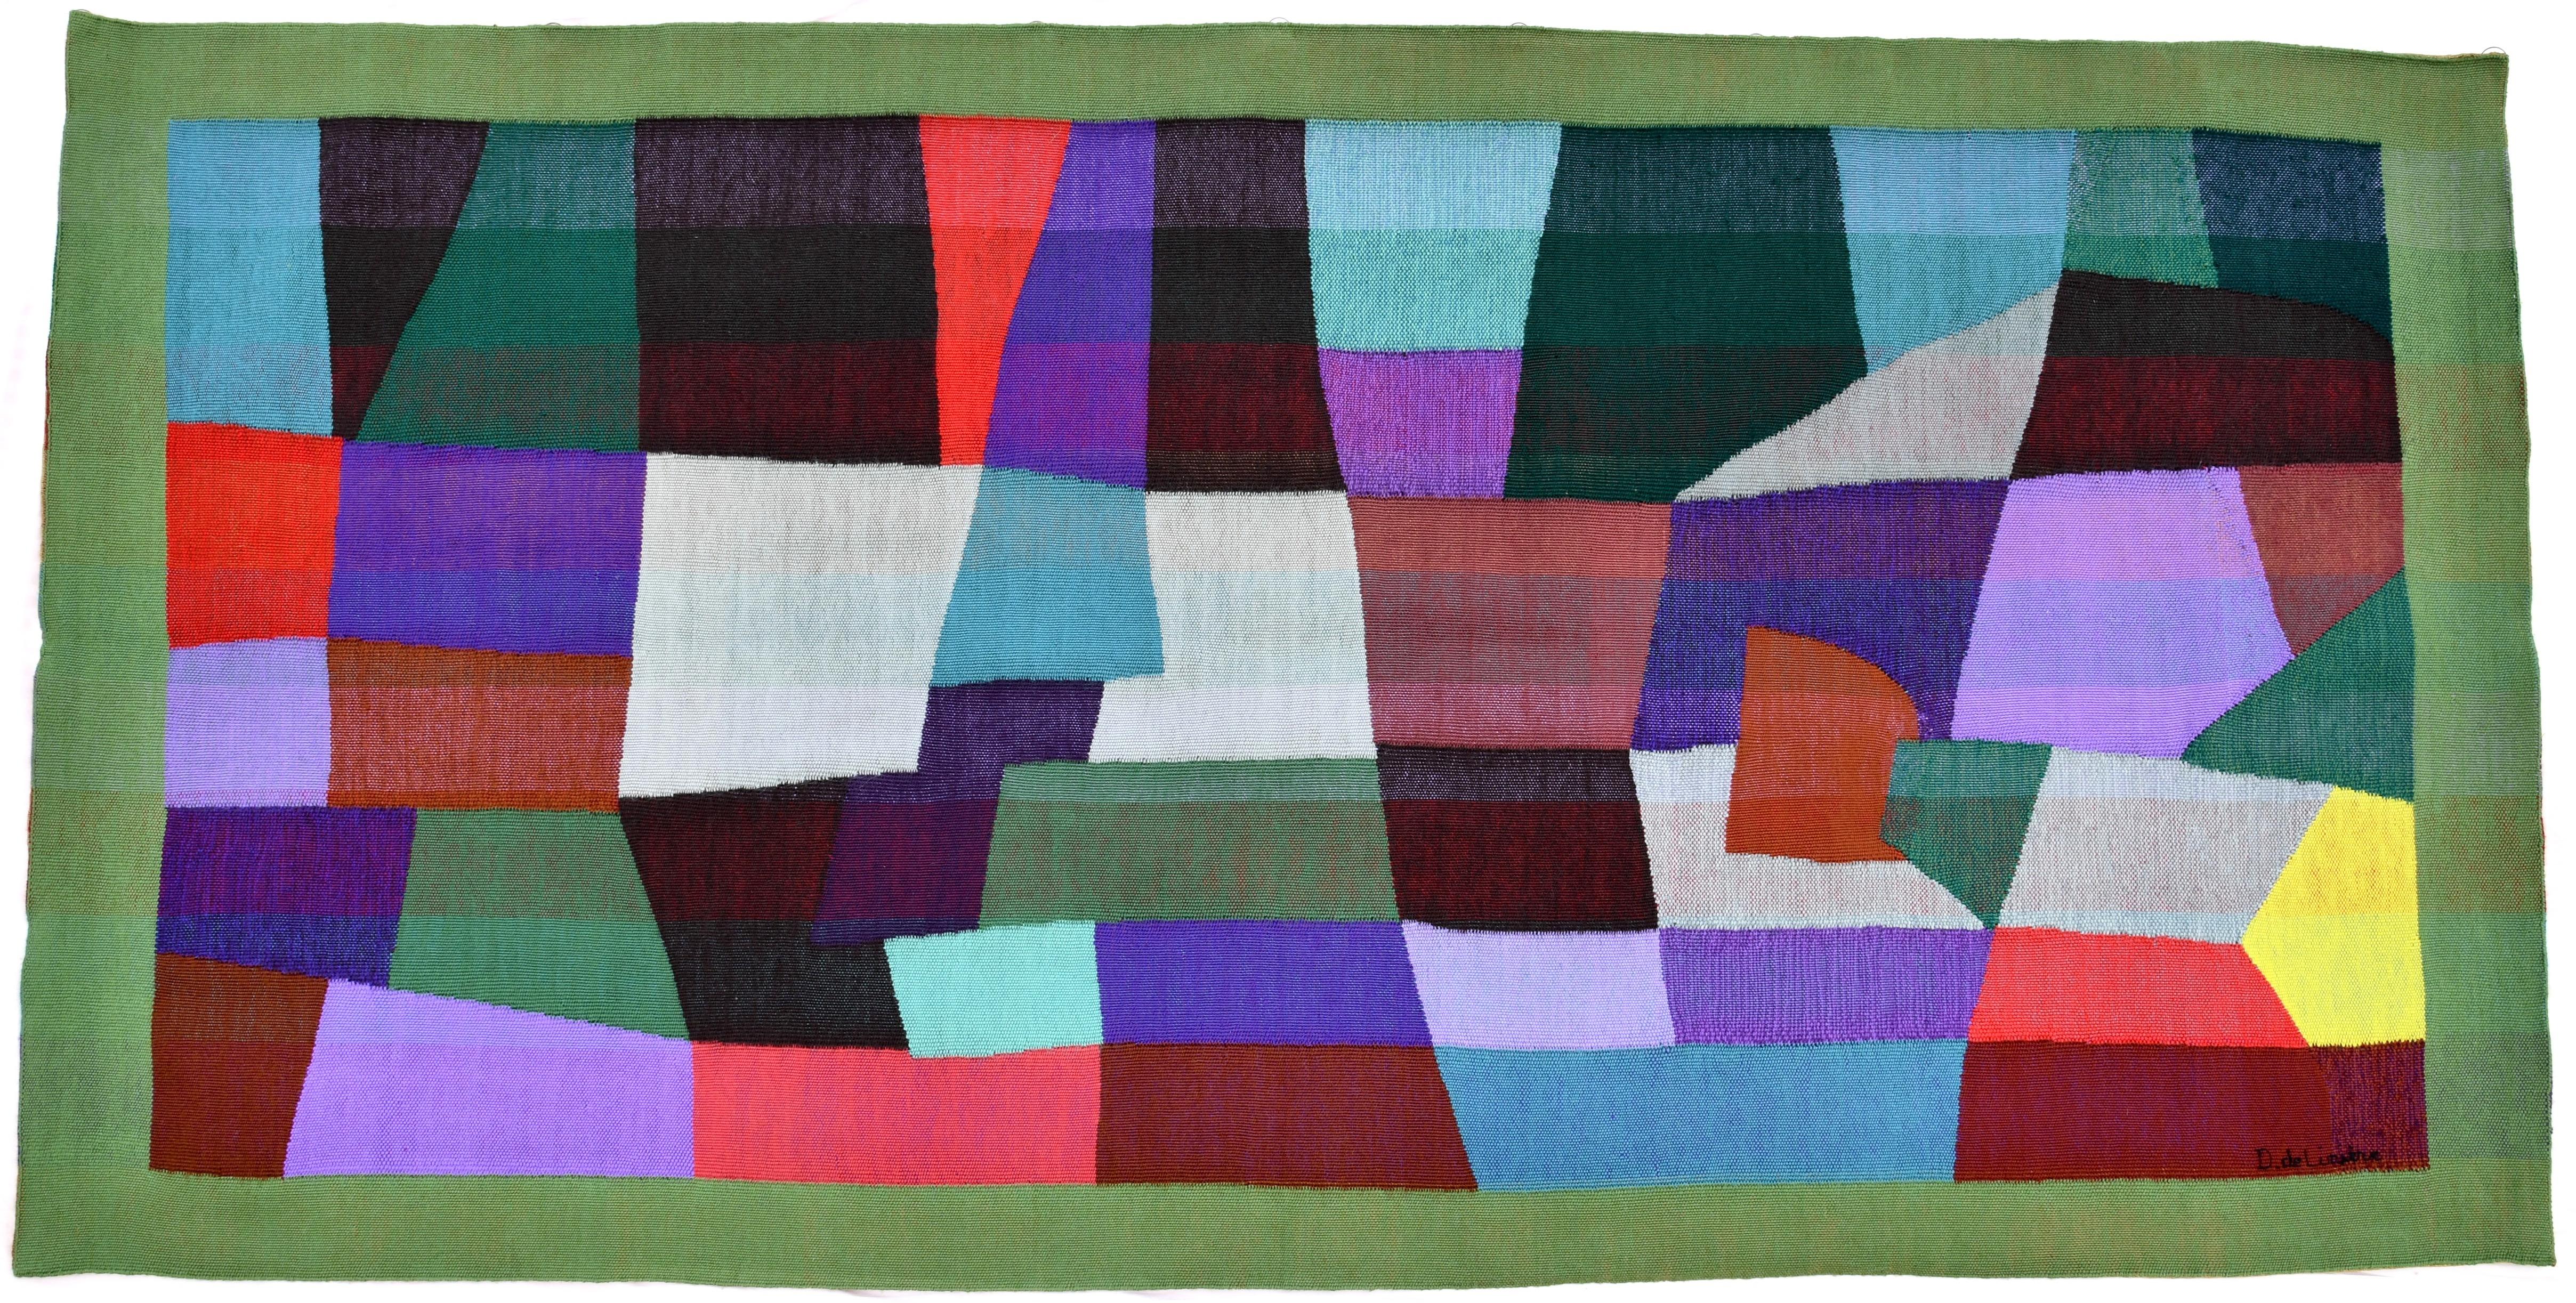 Title: La paix des ombres or the peace of the shadows.
A beautiful and unique Mid-Century abstract tapestry handwoven by the artist Daniel de Liniere, born in France 1925.